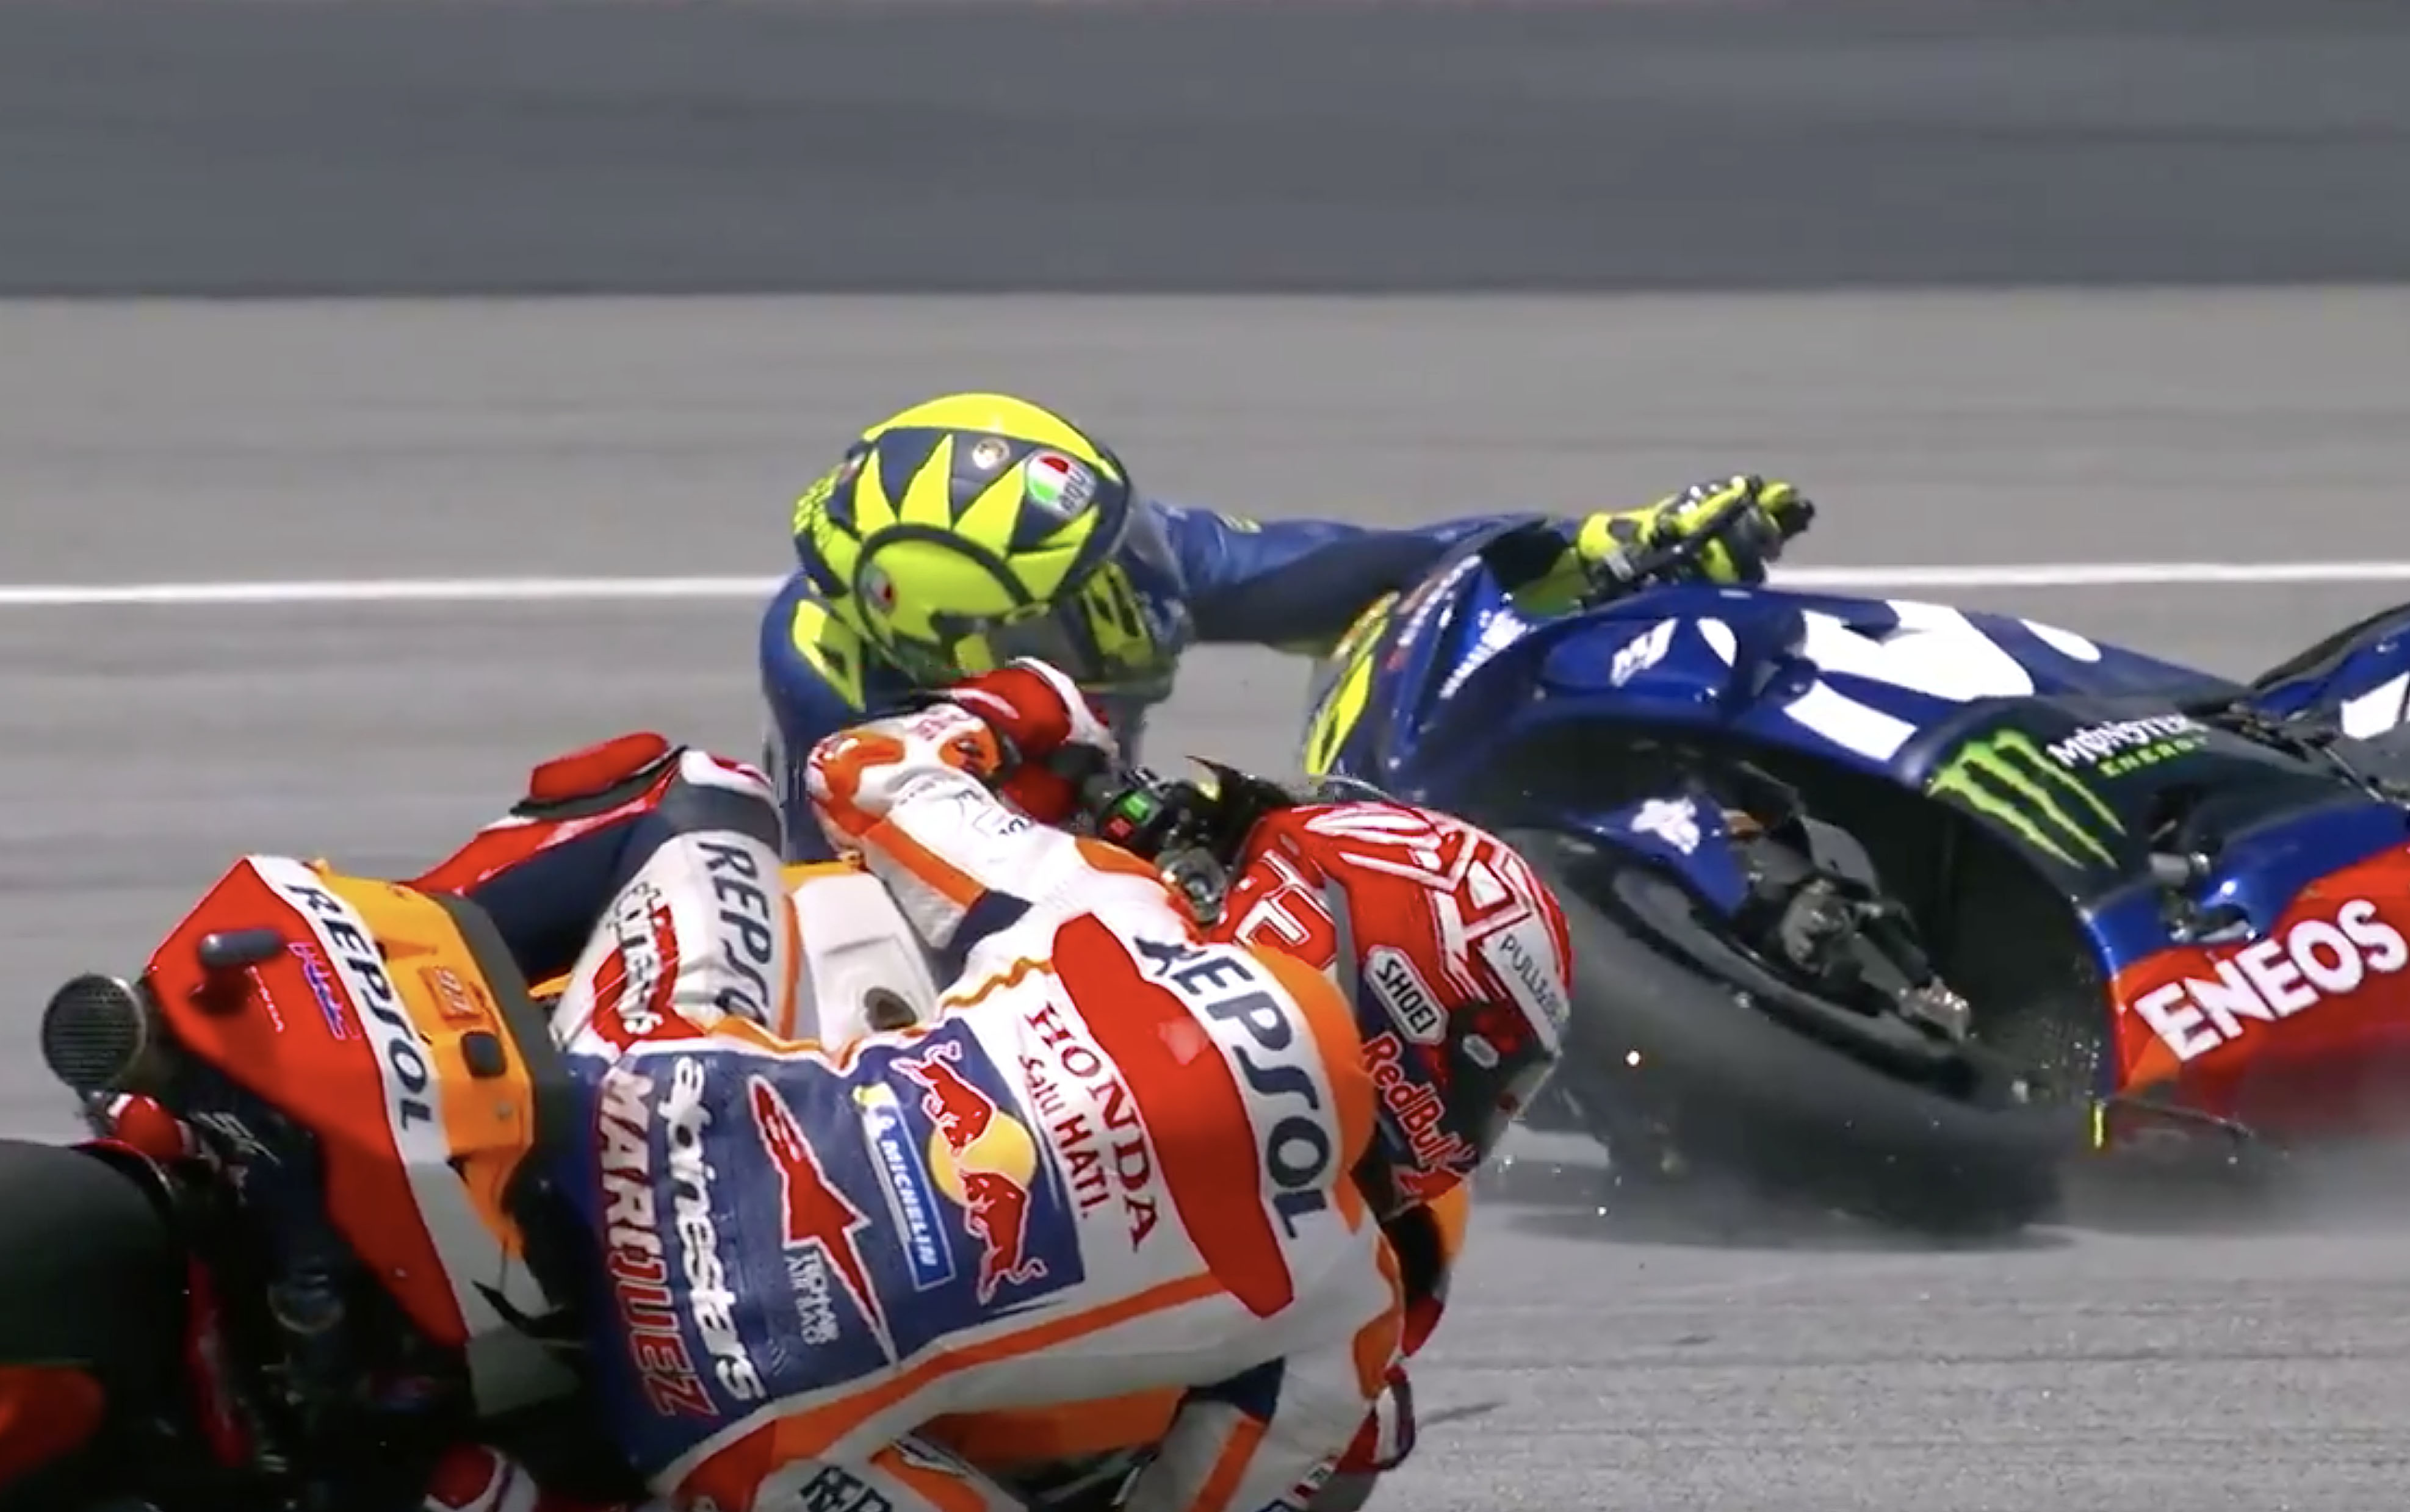 Why does Valentino Rossi keep crashing? - The Race